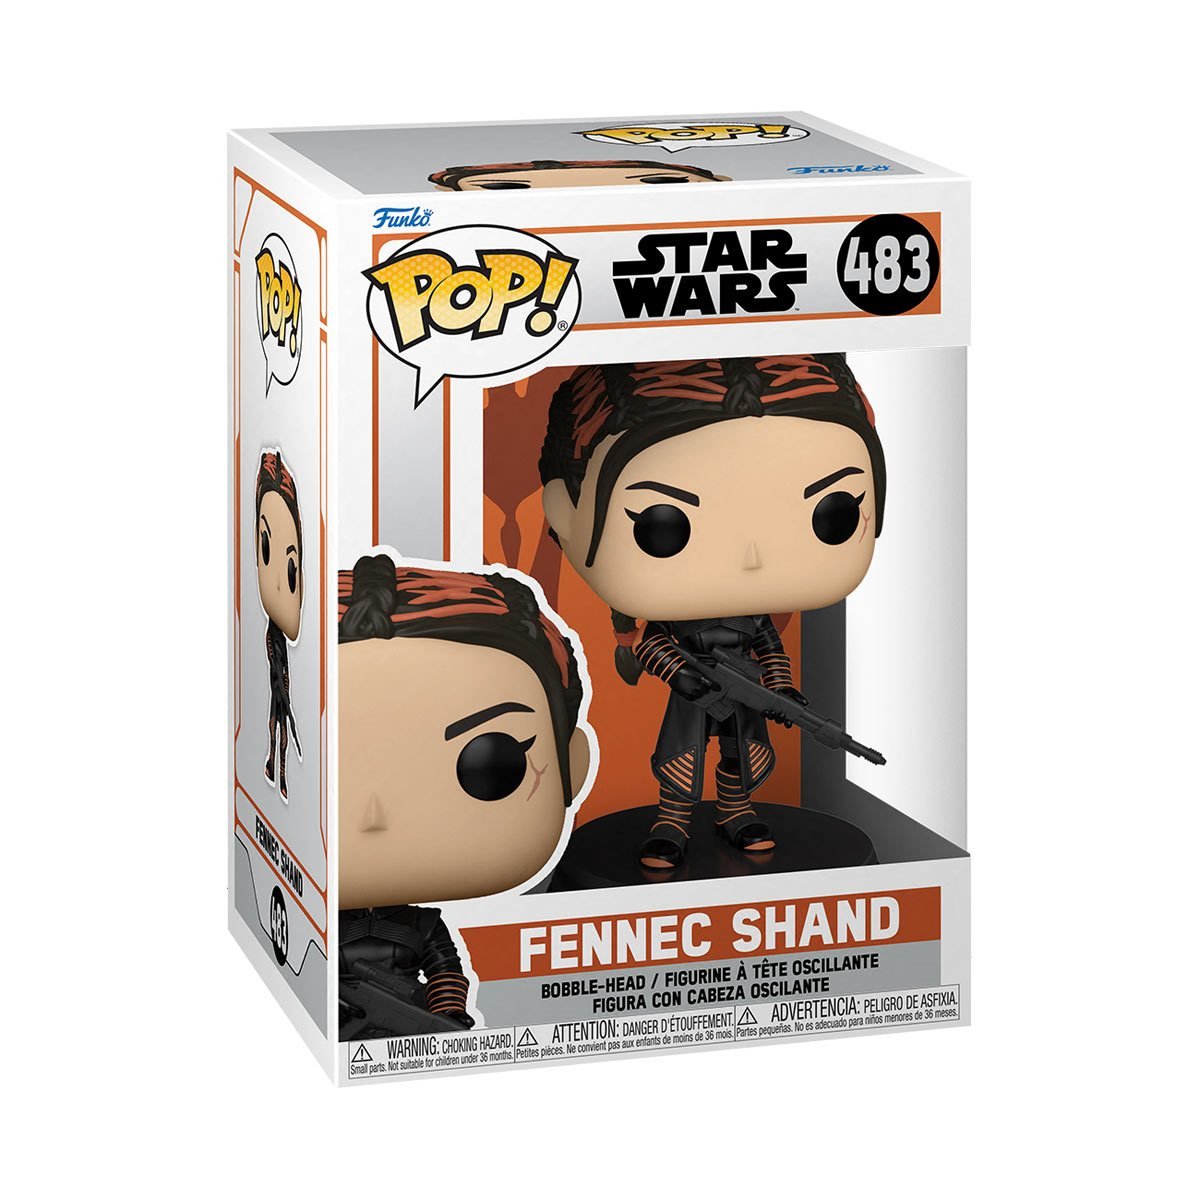 Funko Pop! Star Wars: The Mandalorian Fennec Shand Vinyl Figure #483.  Available at Blue Culture Tees!